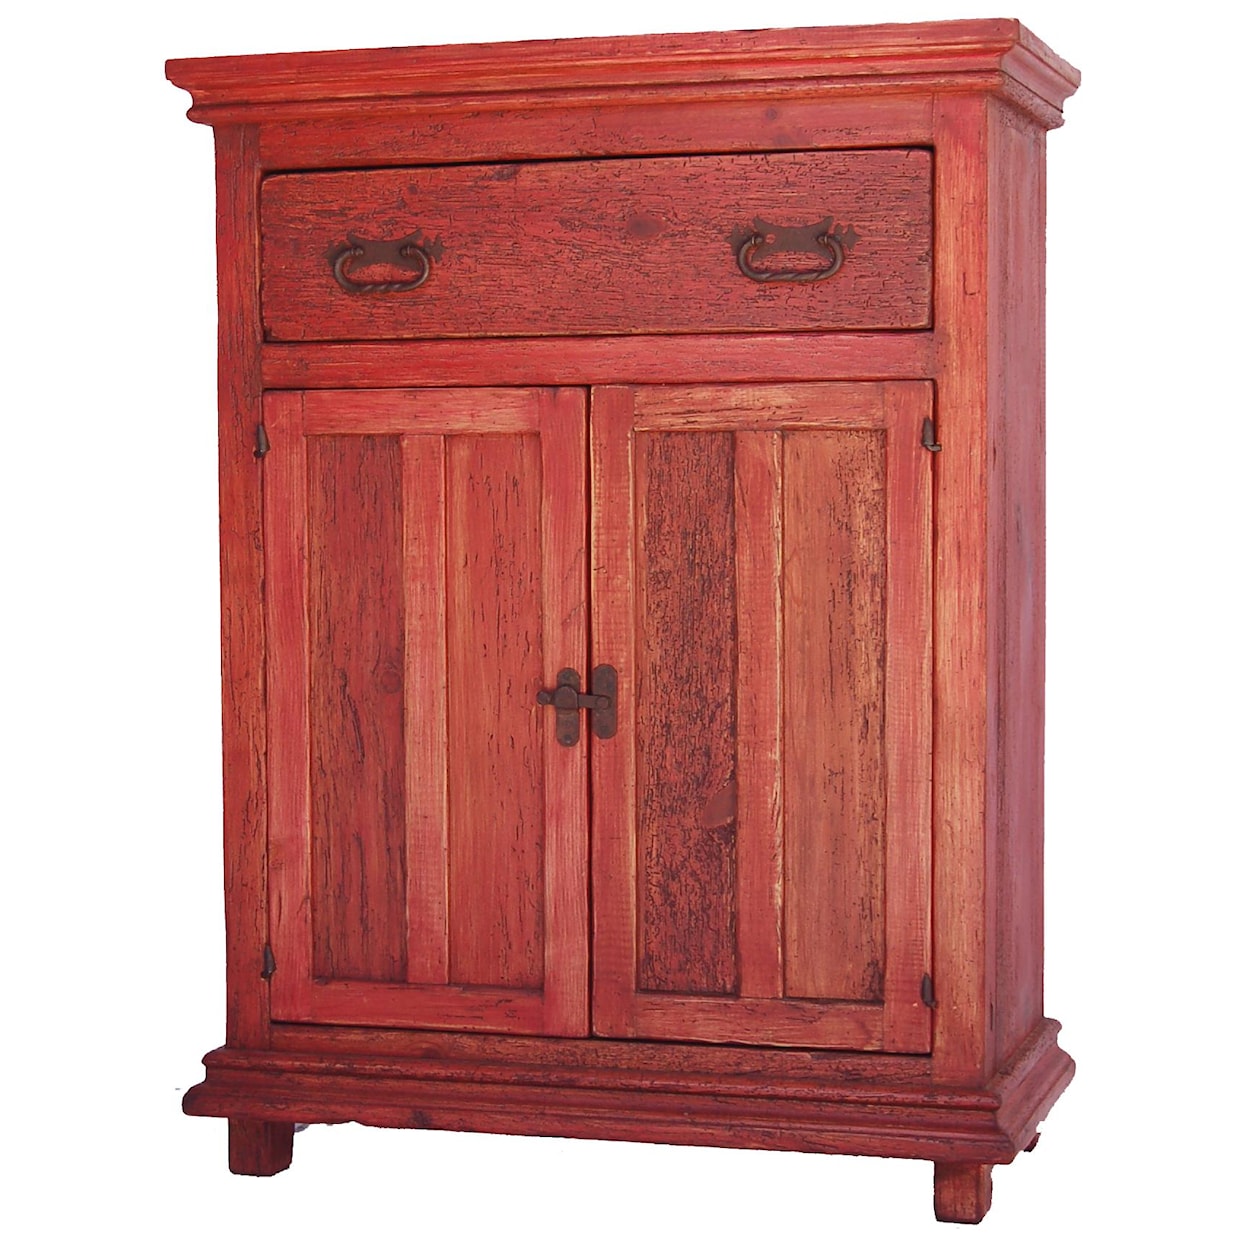 Furniture Source International Dining Rockwell Chest